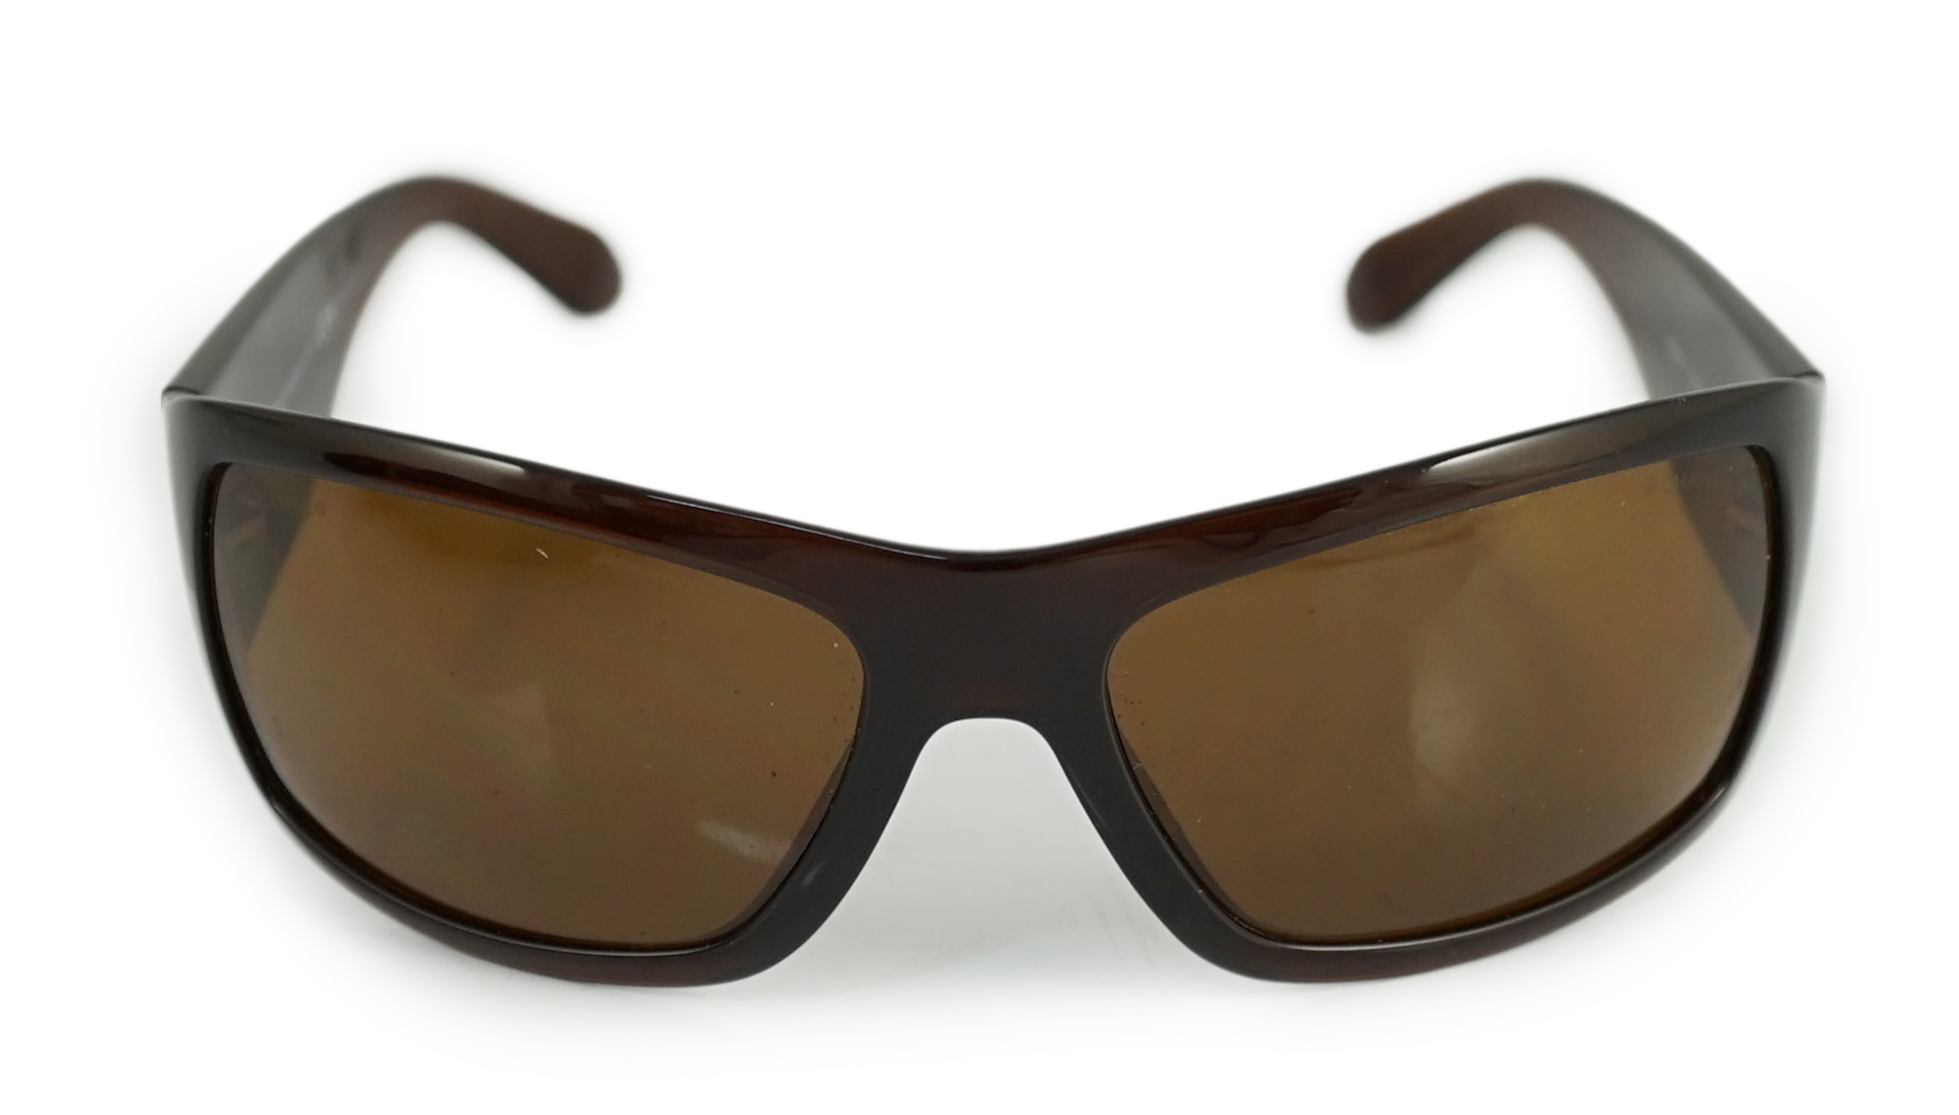 A pair of Chanel brown sunglasses